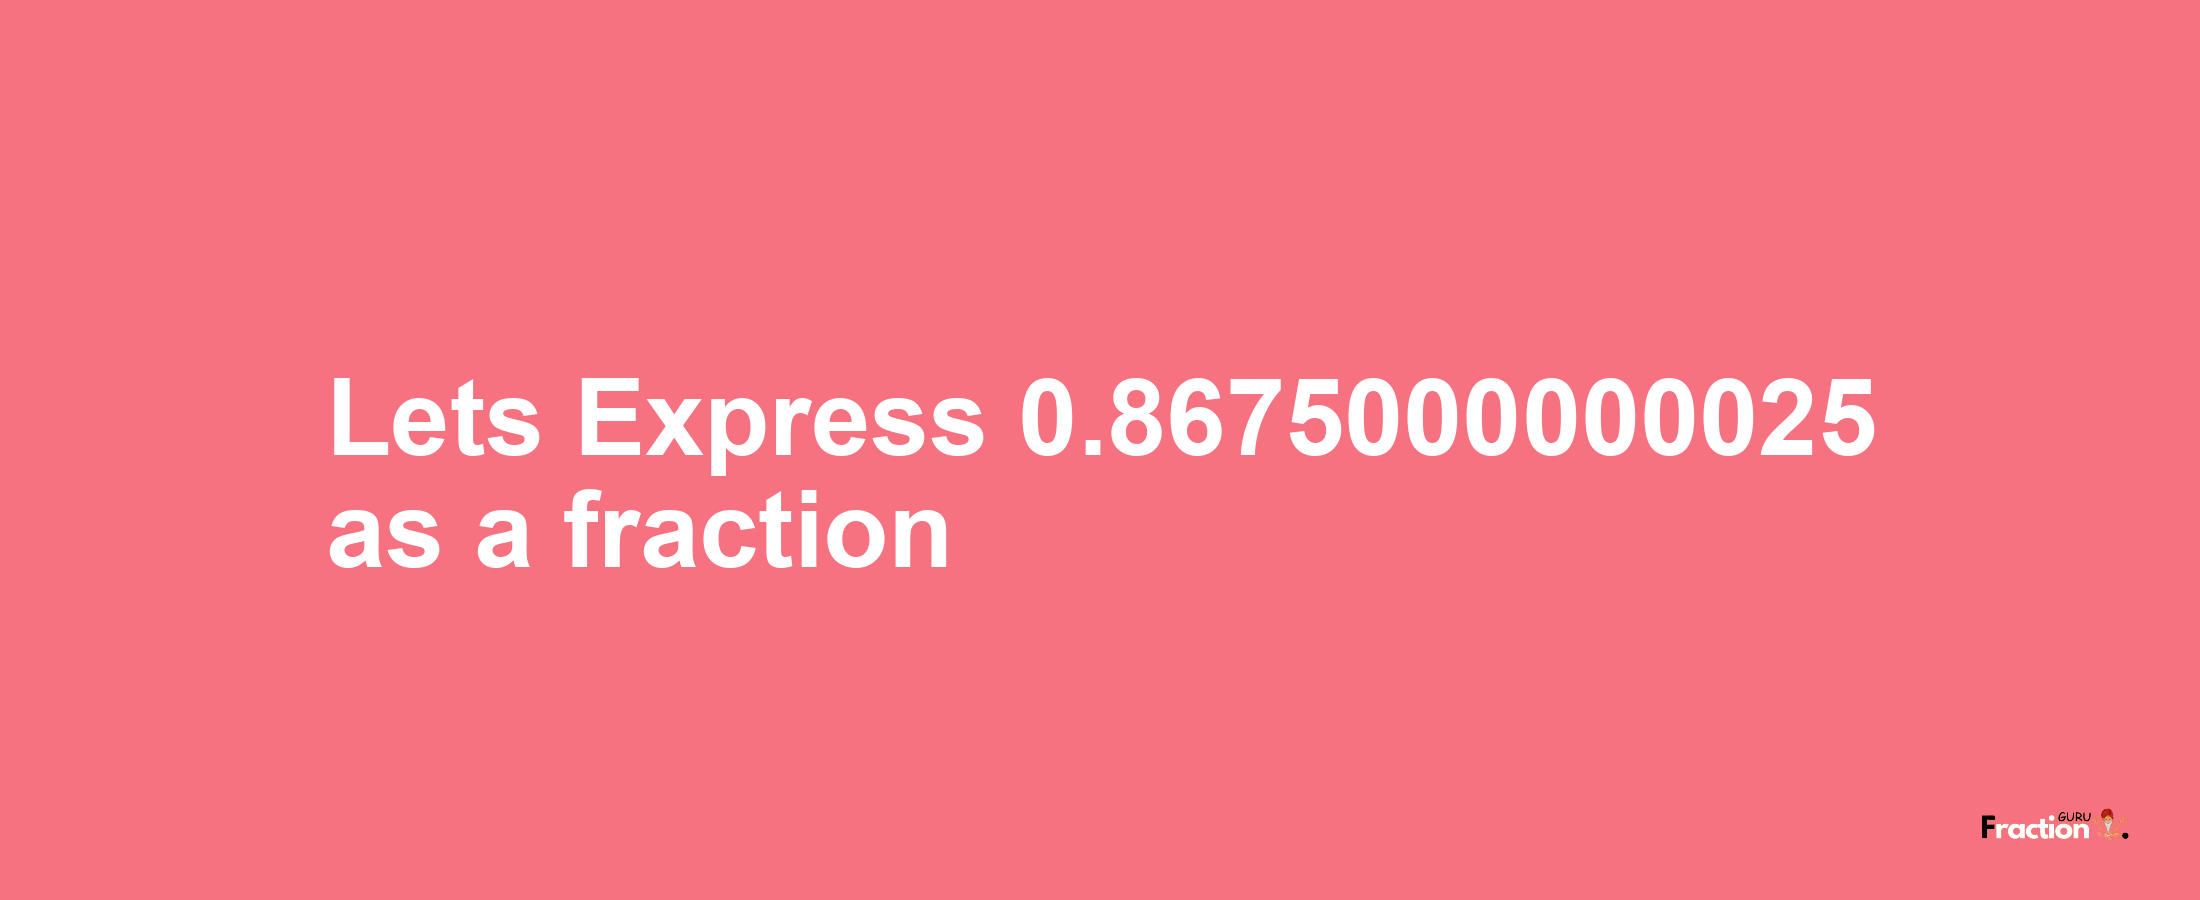 Lets Express 0.8675000000025 as afraction